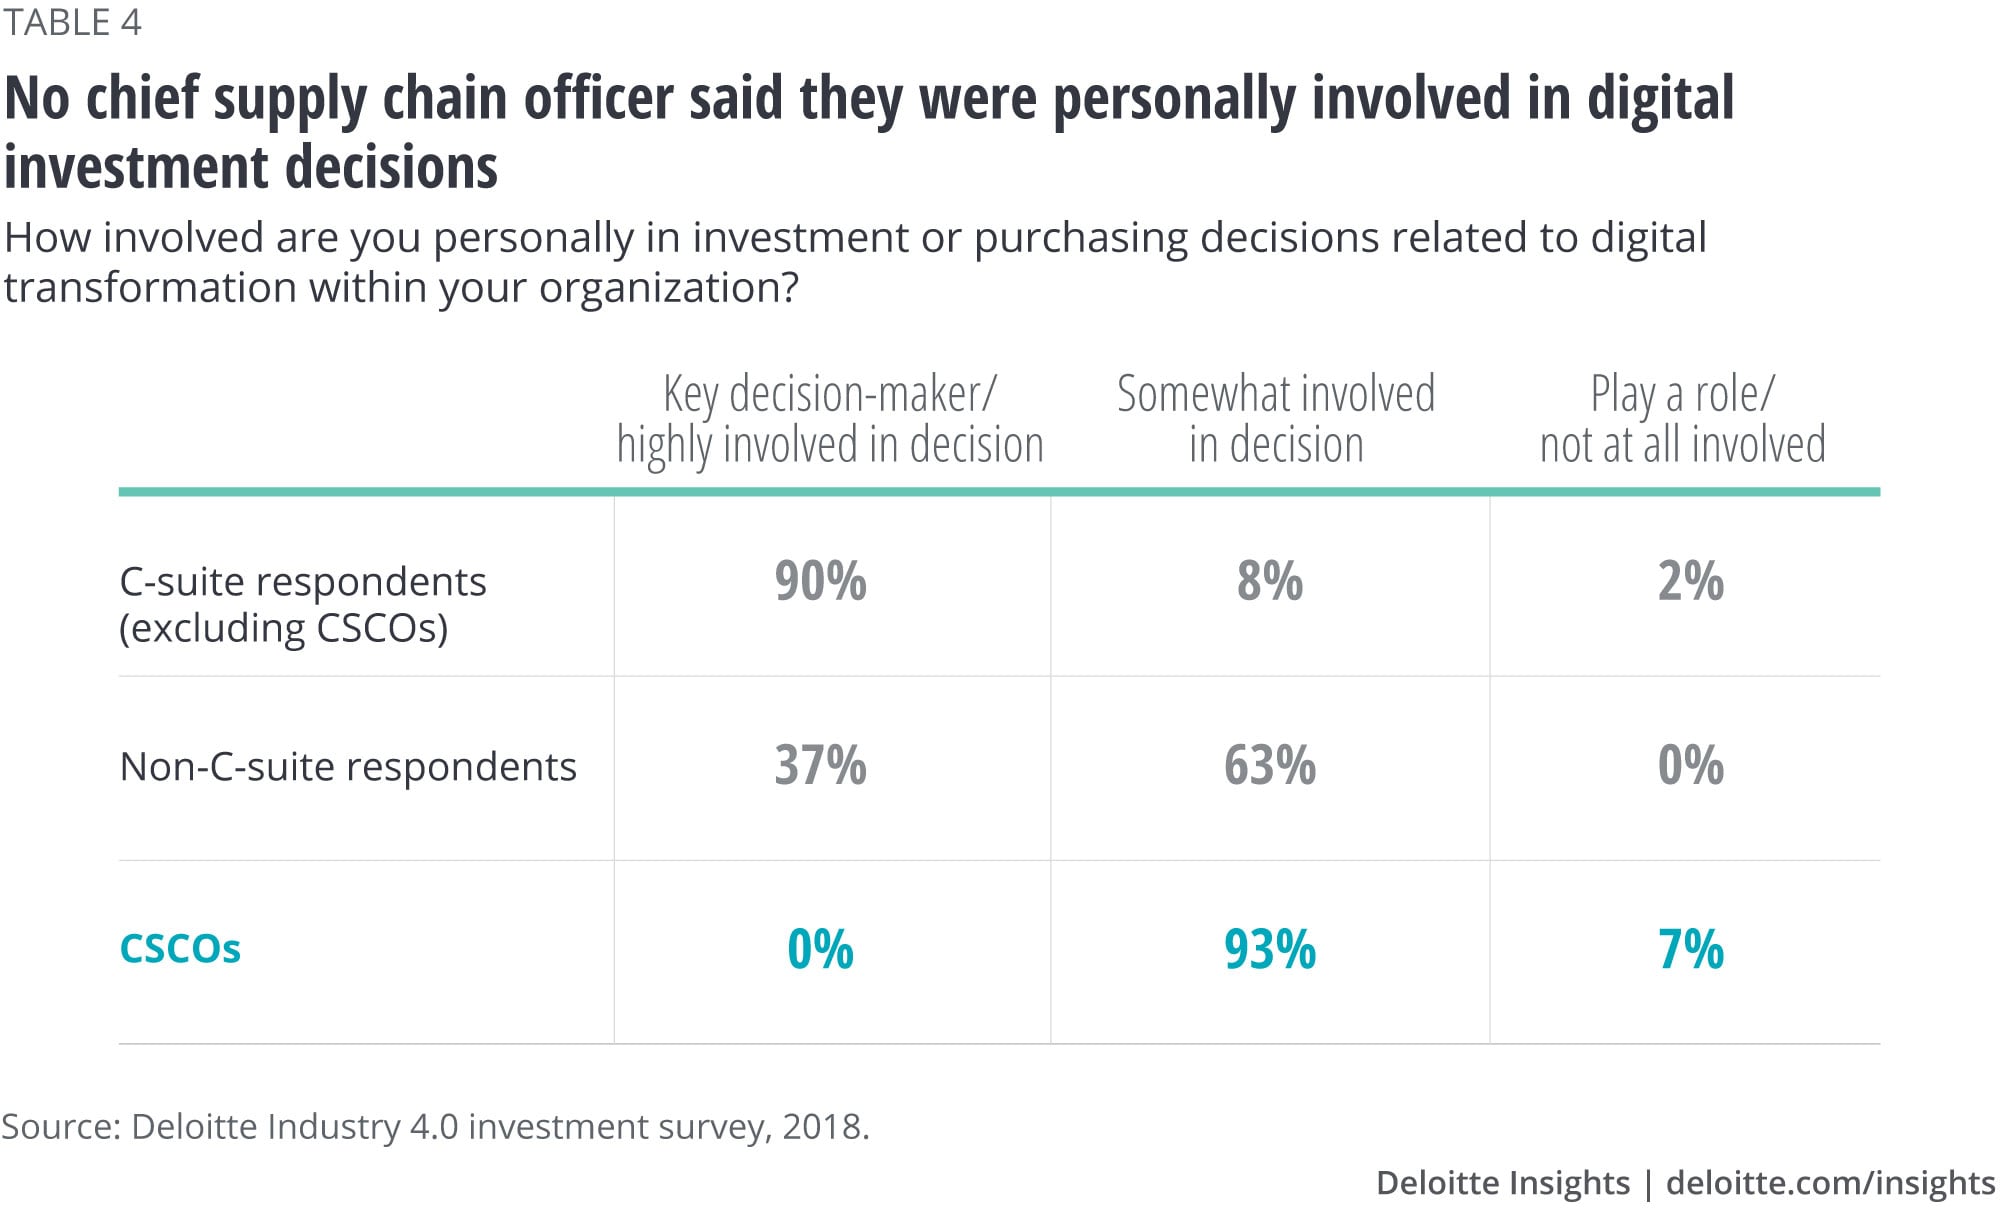 No chief supply chain officer said they were personally involved in digital investment decisions